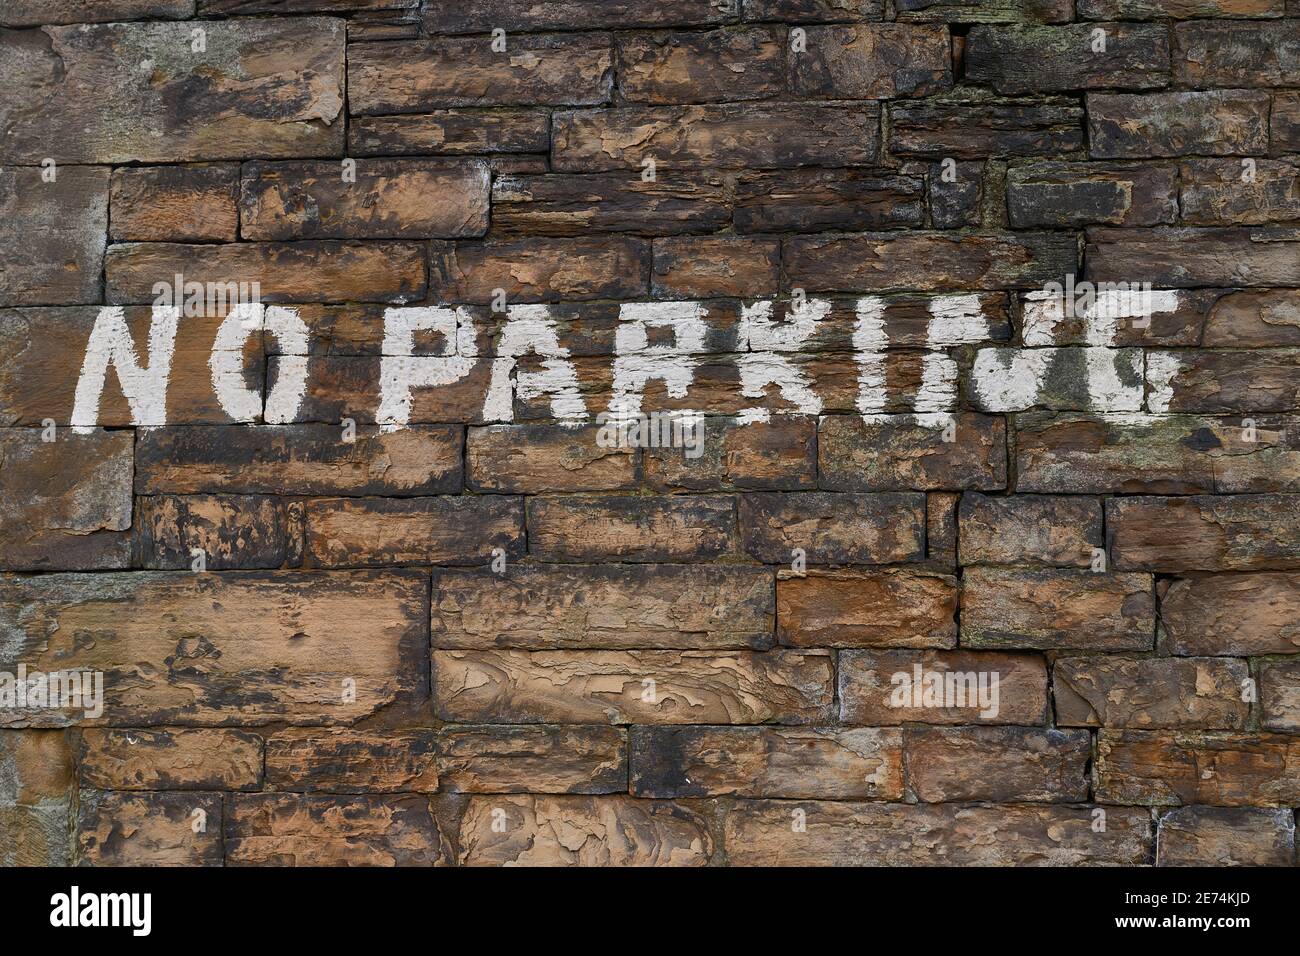 Hand drawn no parking sign in white paint Stock Photo